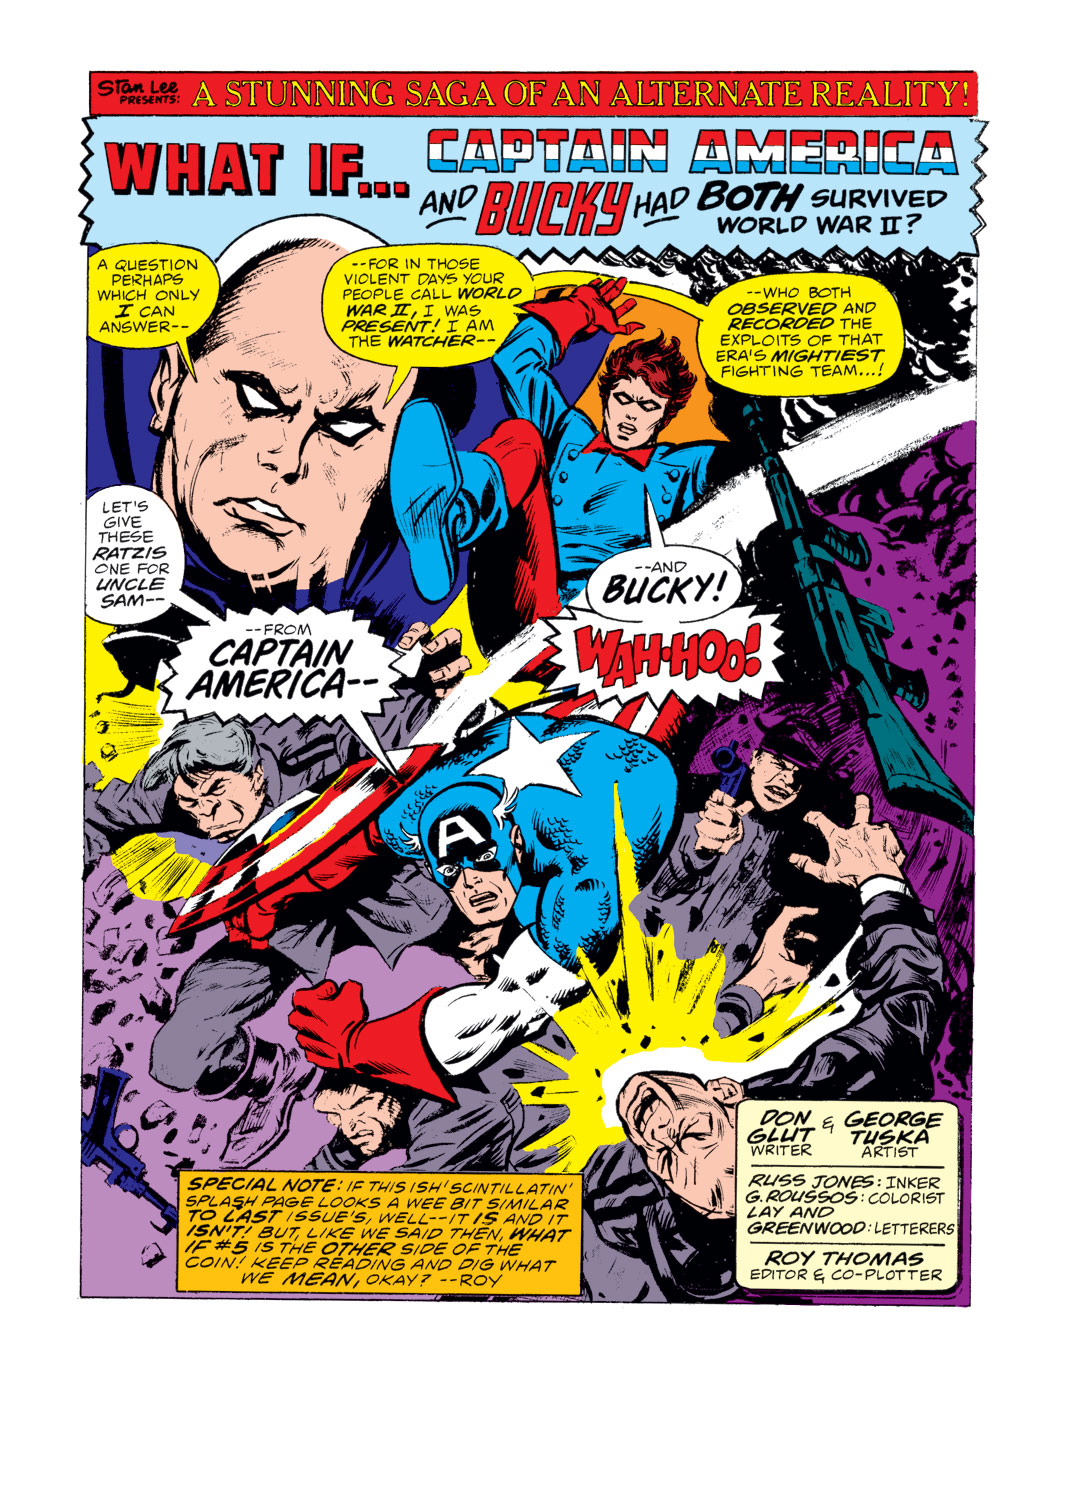 <{ $series->title }} issue 5 - Captain America hadn't vanished during World War Two - Page 2